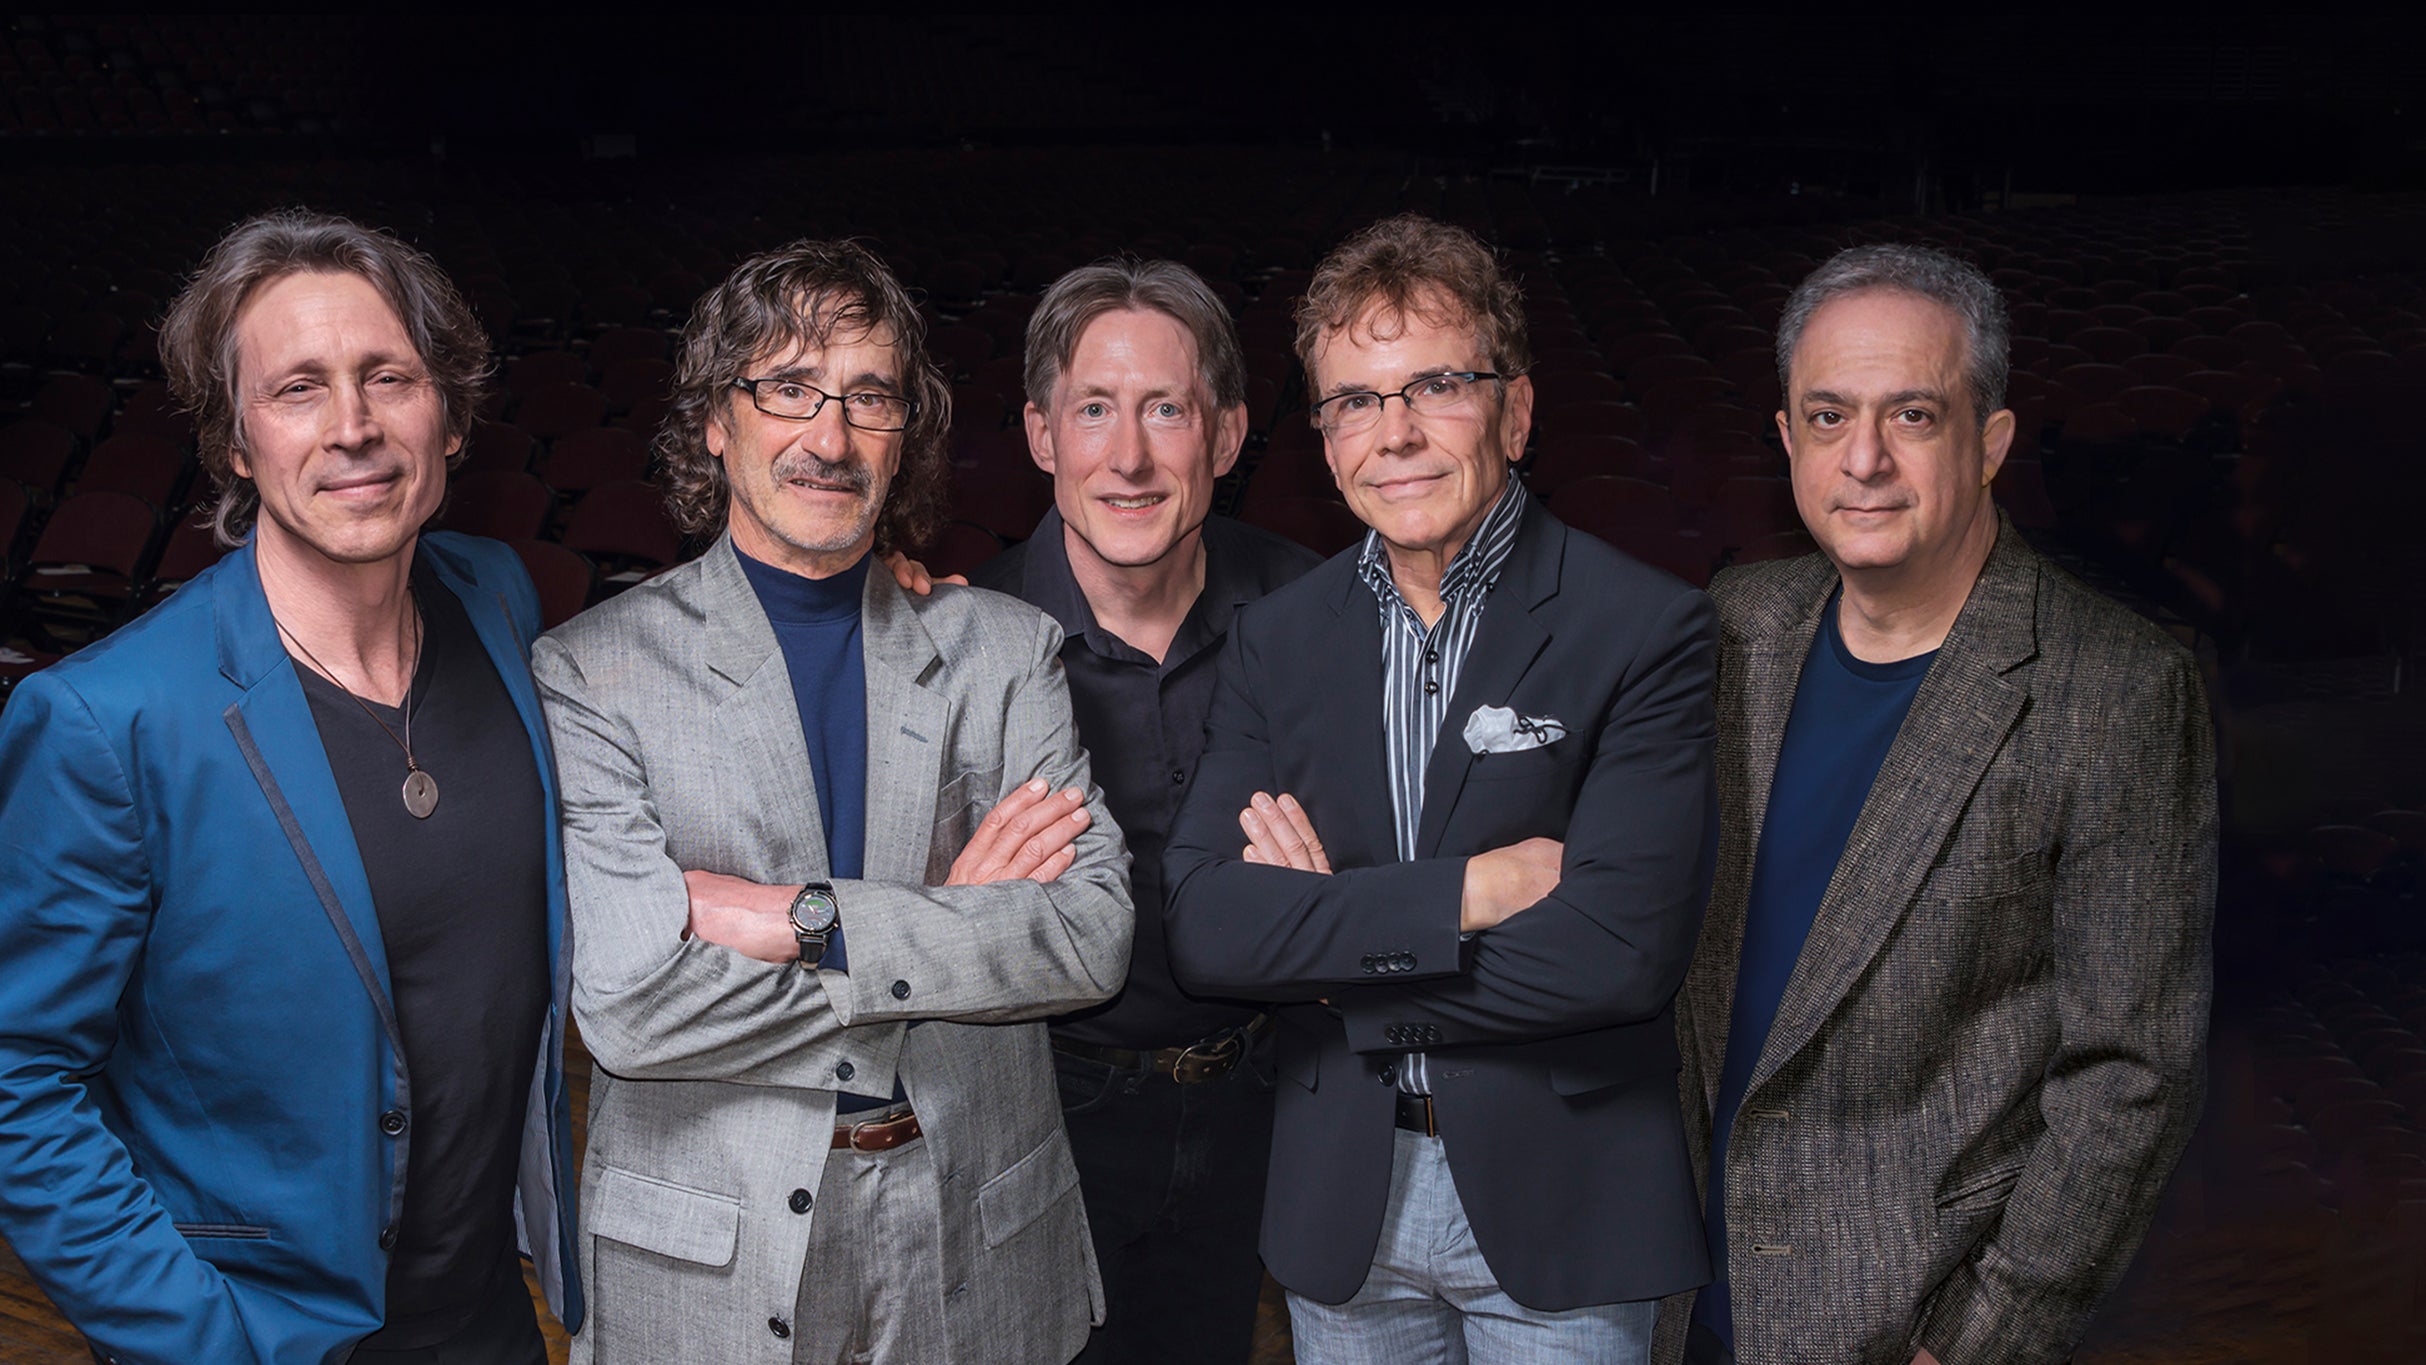 Donnie Iris & the Cruisers in Moon Township promo photo for Radio presale offer code